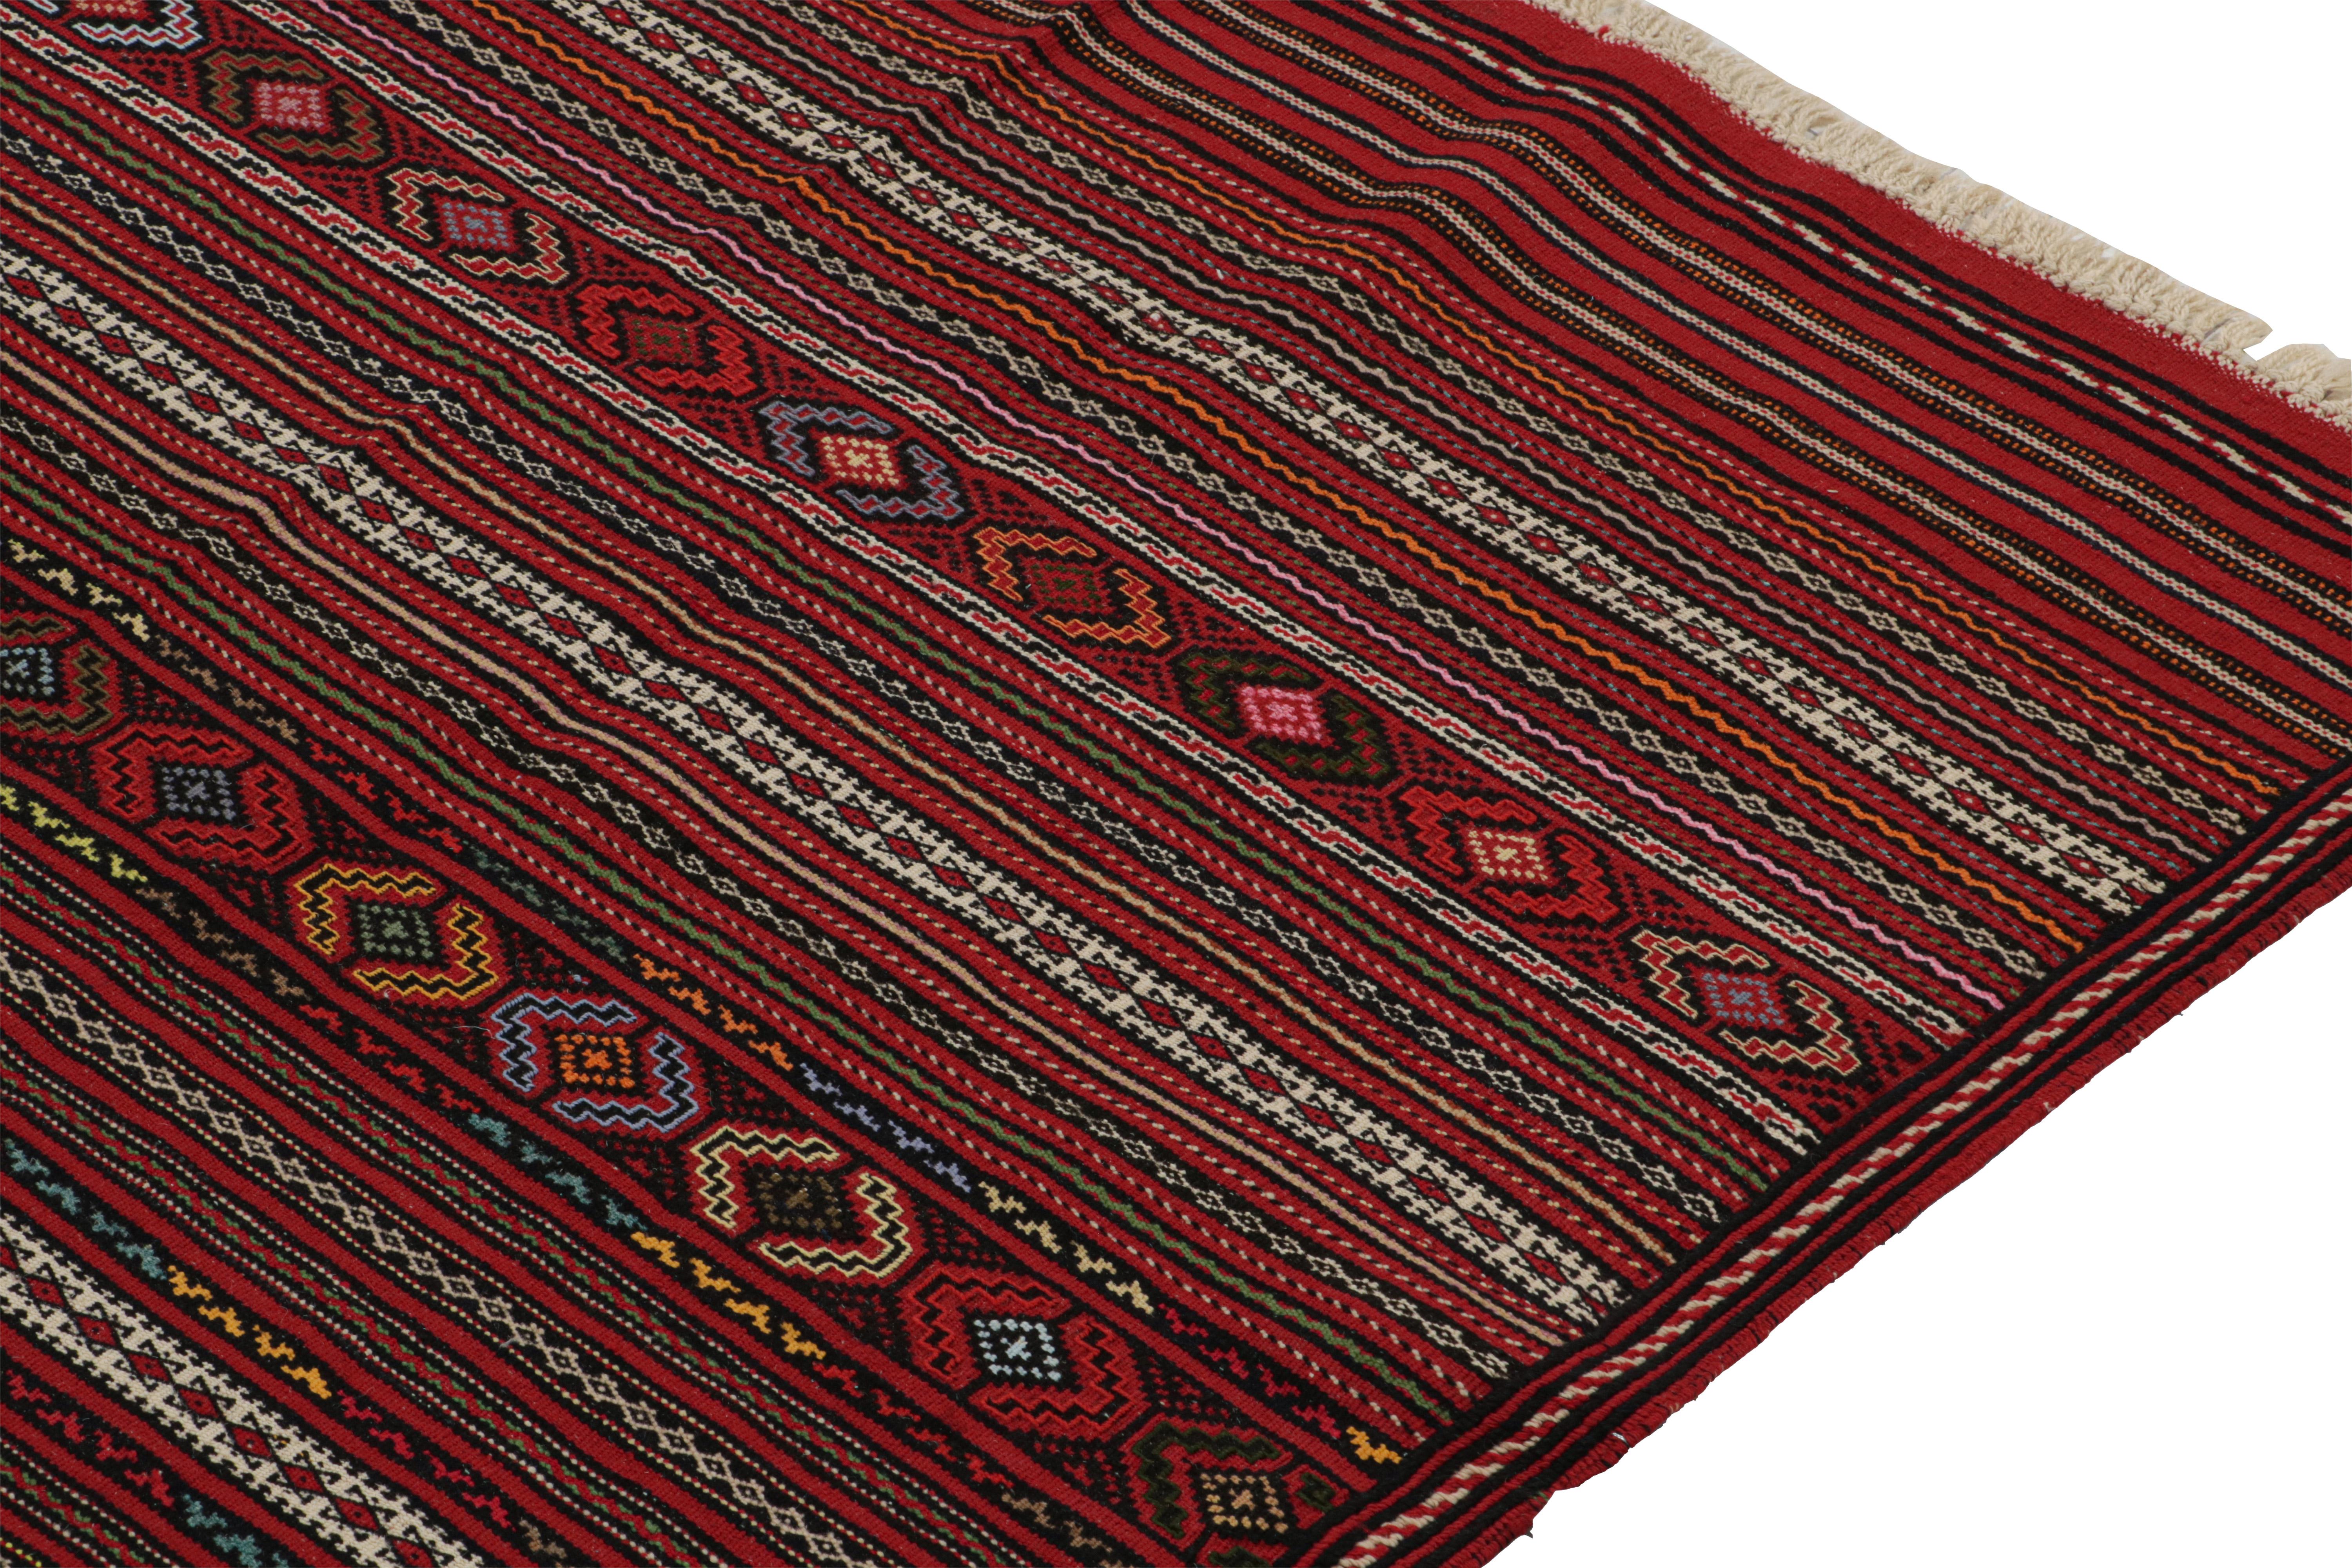 Hand-Woven Vintage Baluch Kilim in Red with Stripes & Geometric Patterns, from Rug & Kilim For Sale